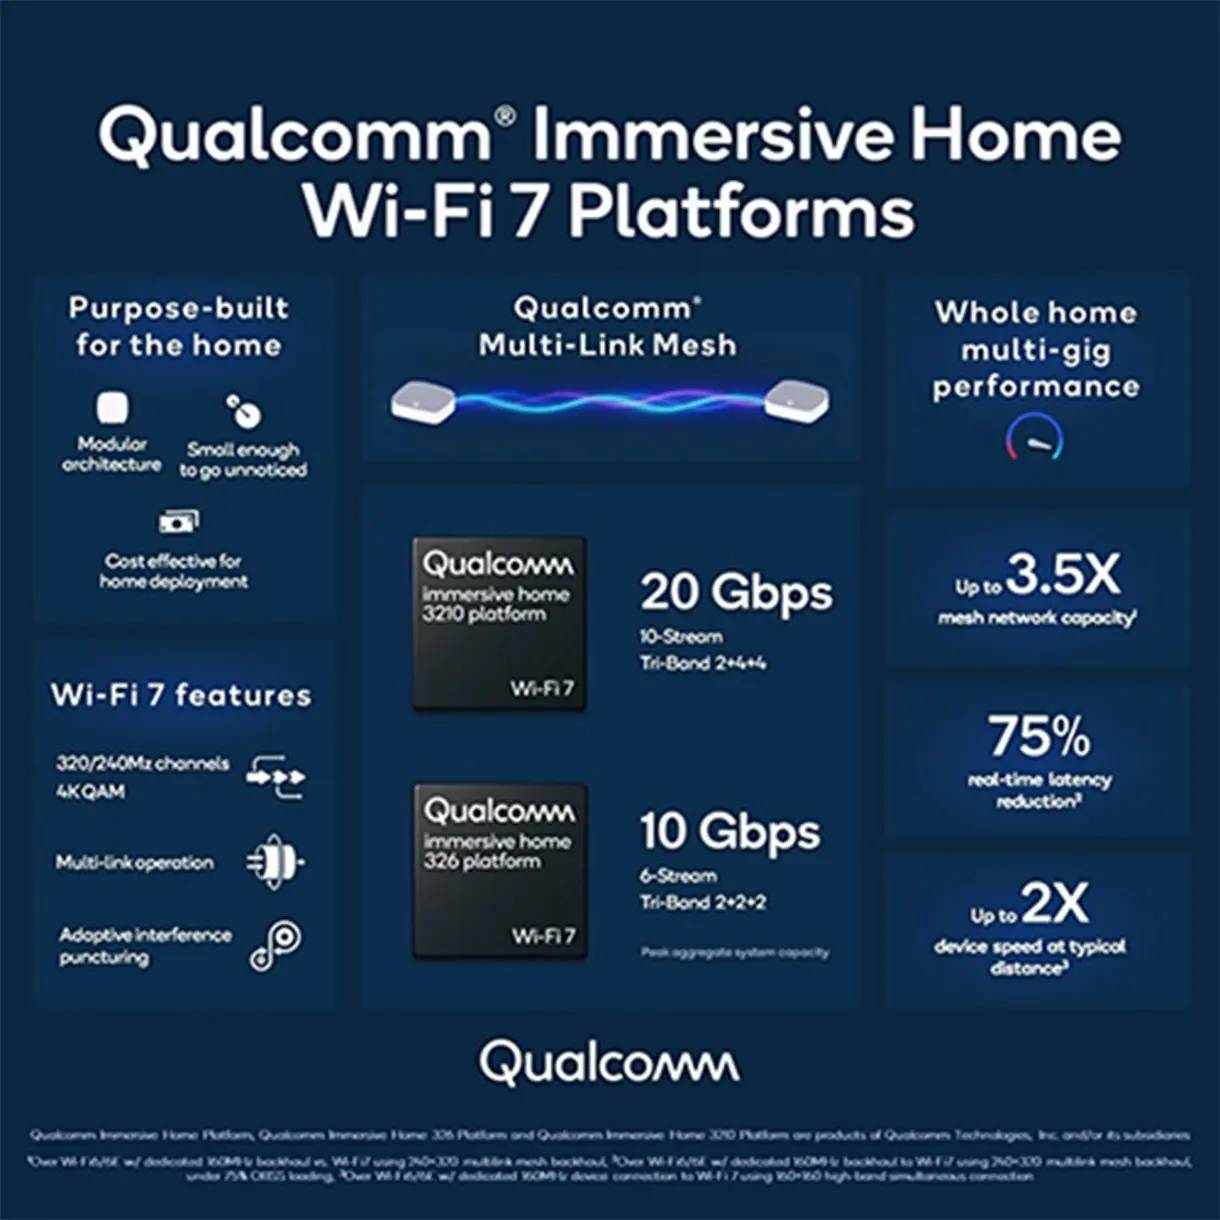 The Wi-Fi 7 Immersive Home Platform devices from Qualcomm could appear soon